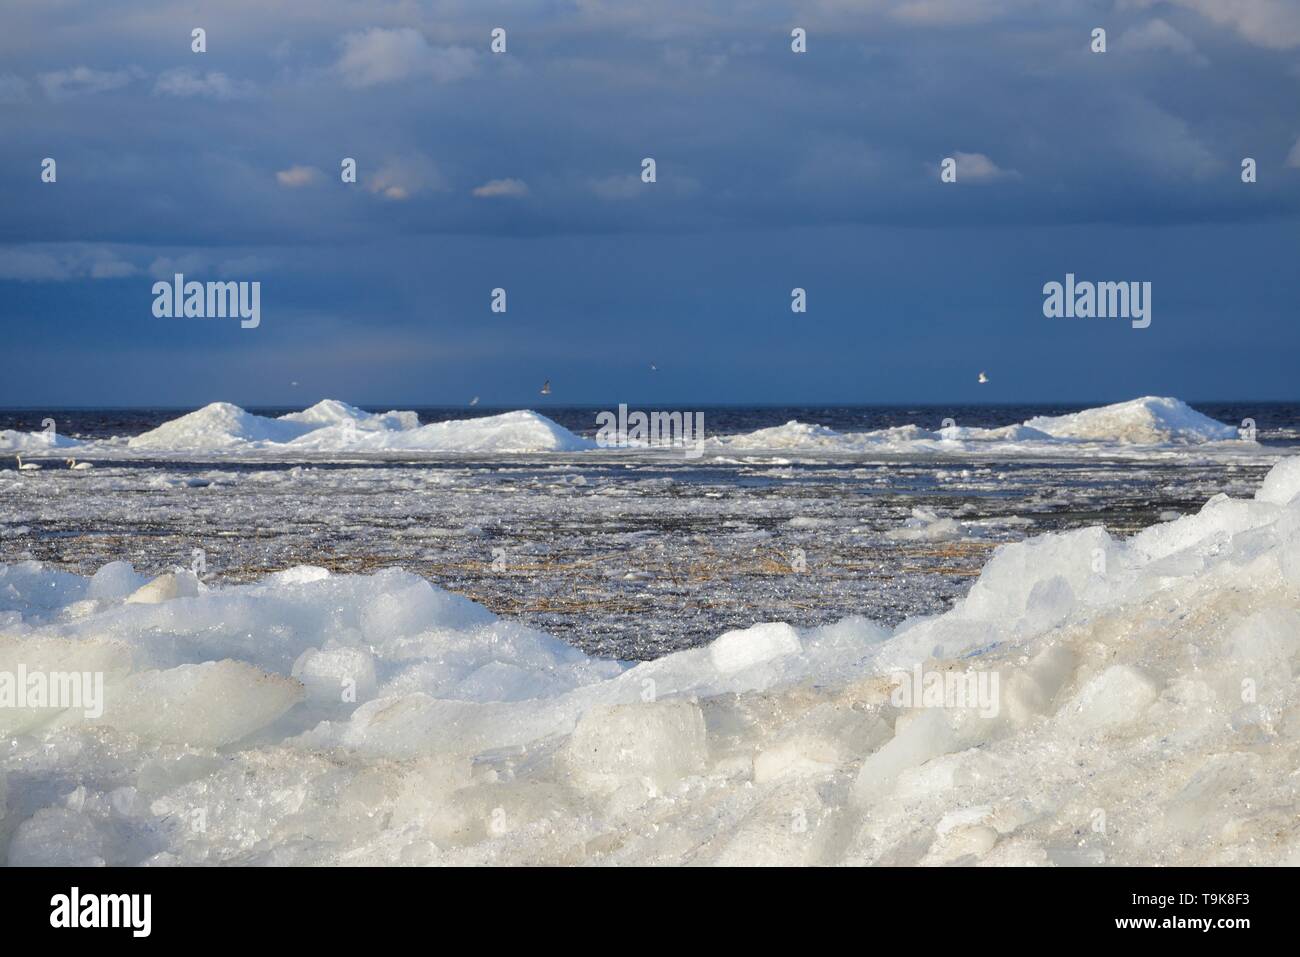 Wind-blown lake ice piled up near the shore of Lake Peipsi in spring, breaking up as it thaws, Estonia, April. Stock Photo